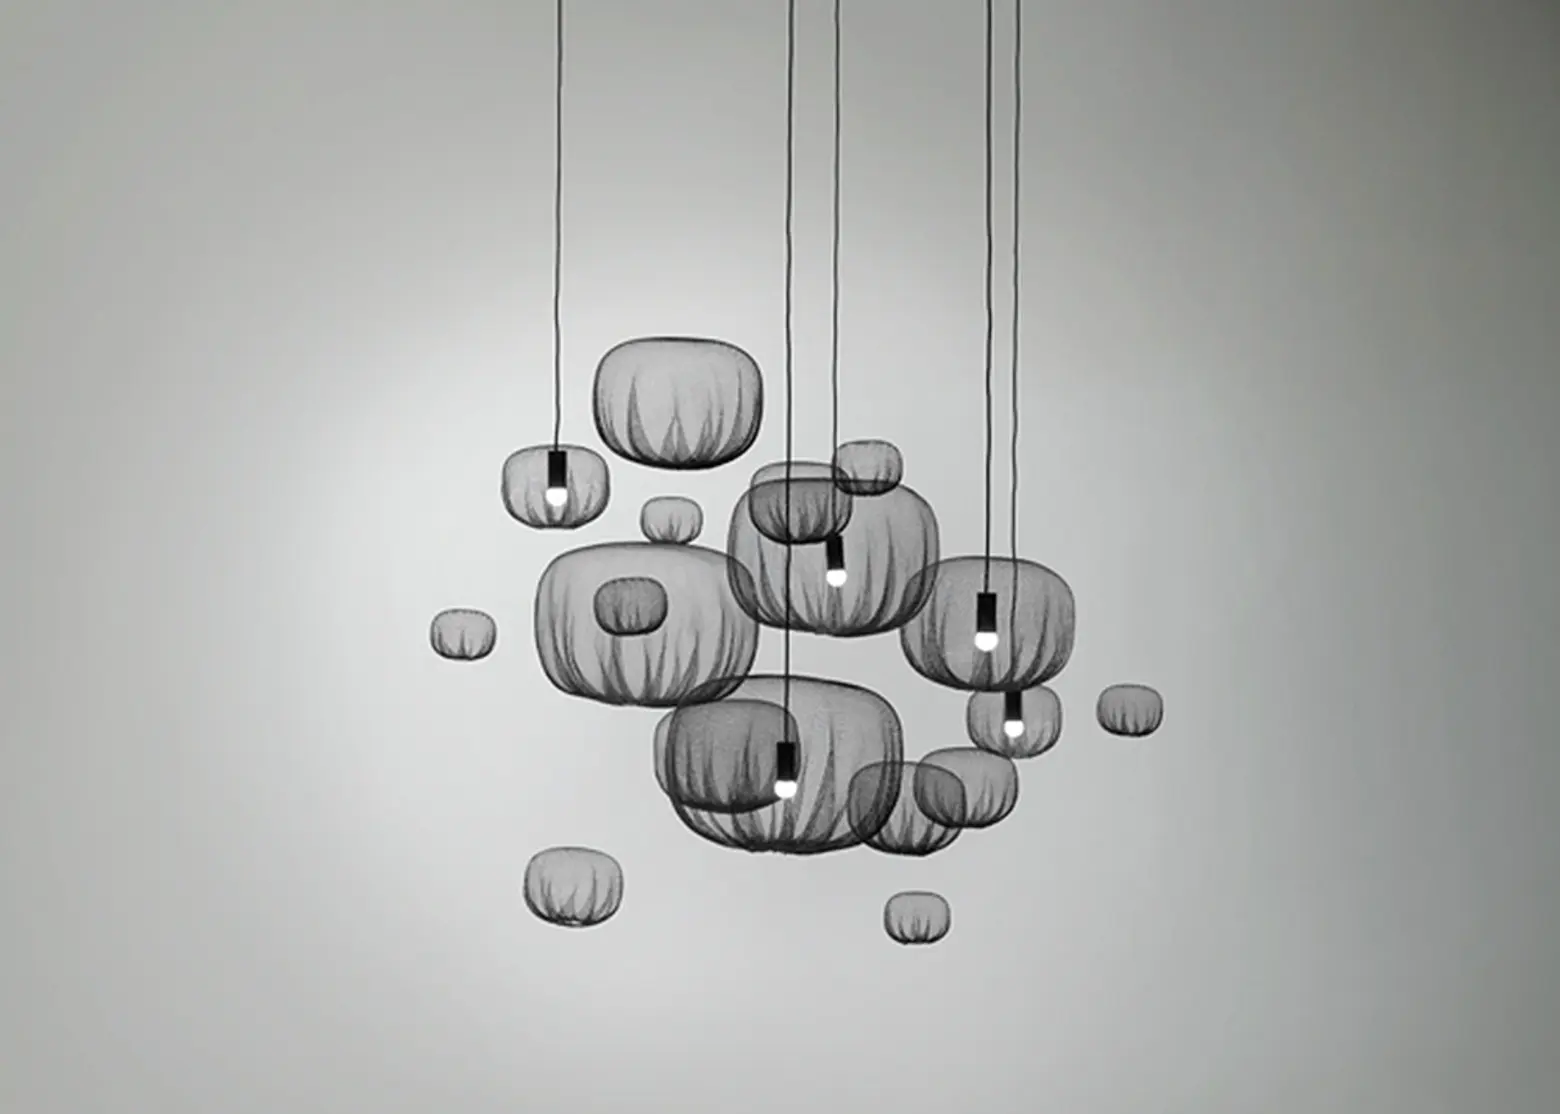 Nendo, Farming-net lights, minimalistic lights, agricultural net, knitted material, heat forming technique, Japanese design